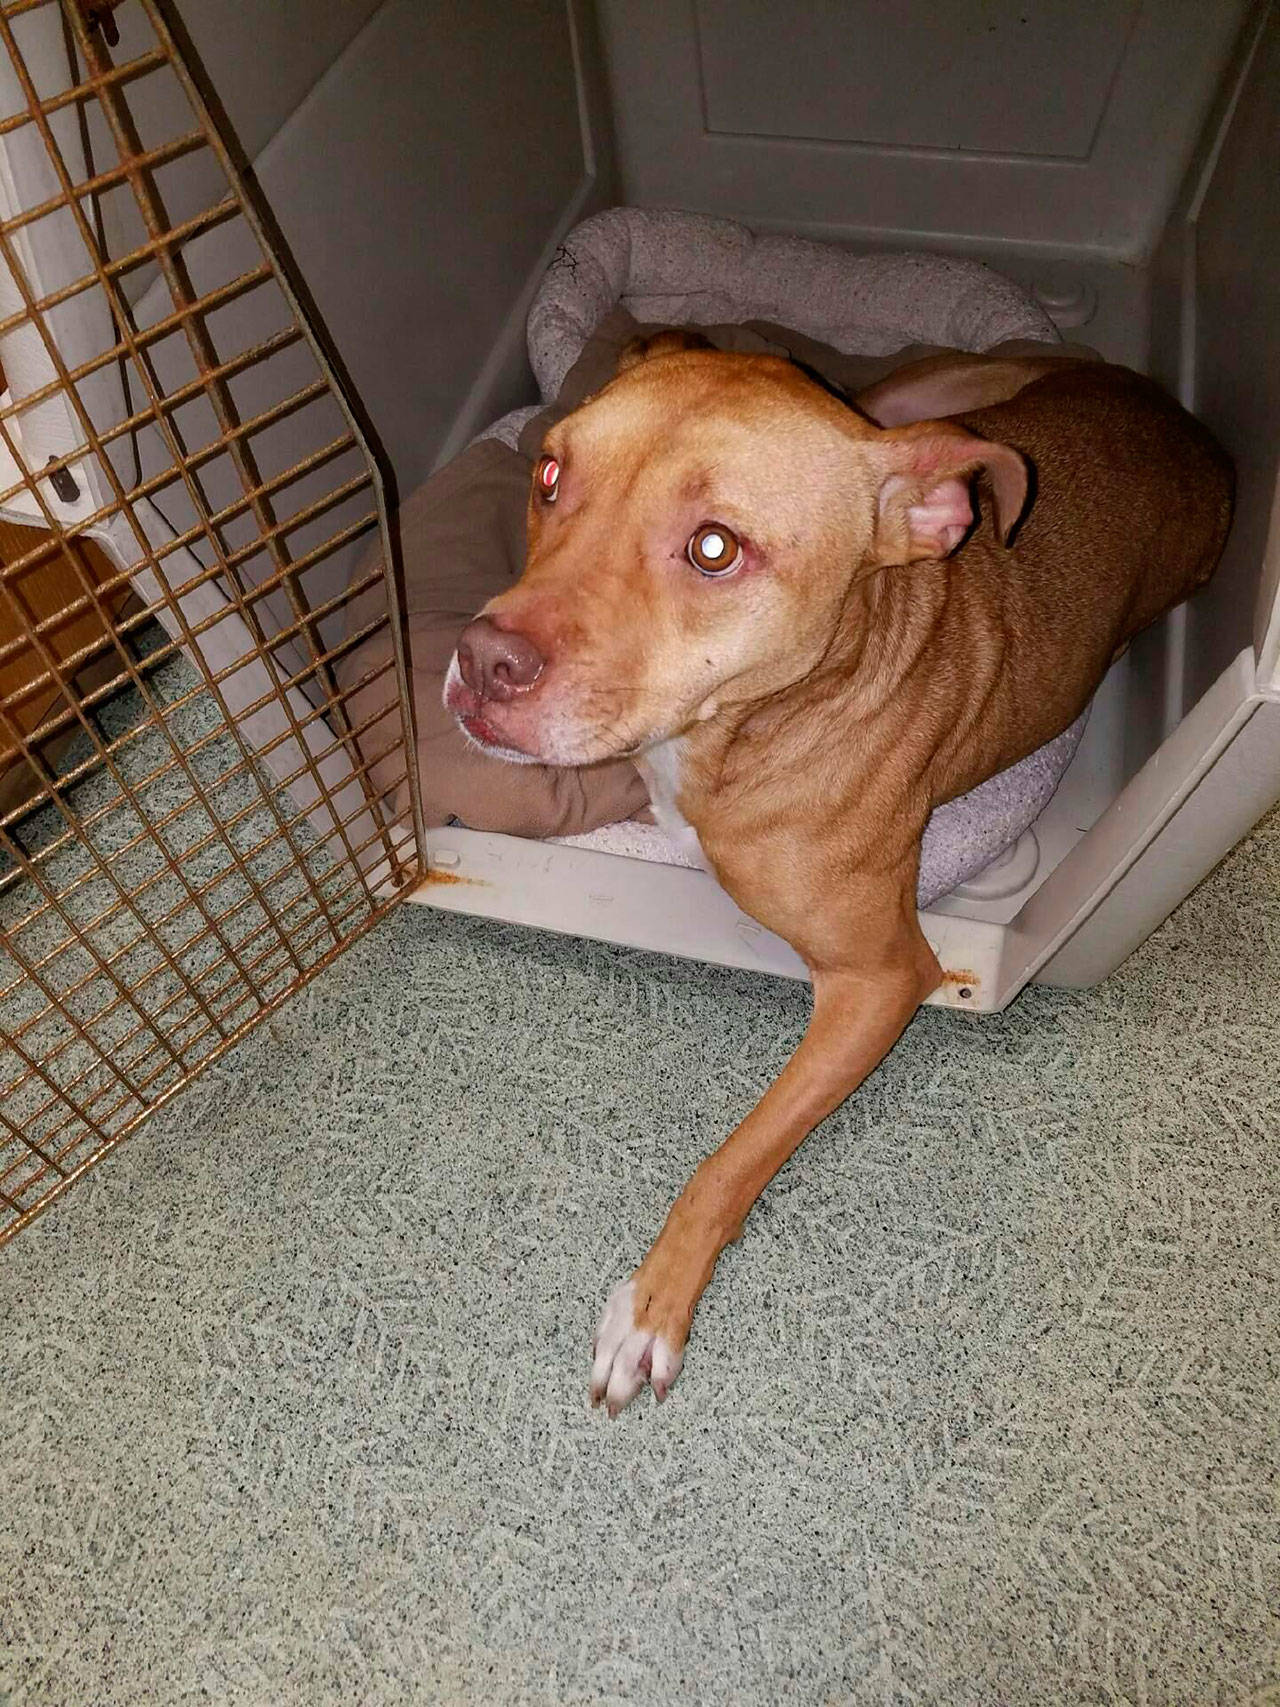 A pitbull named Daisy is euthanized after suffering injuries from being thrown out of a car.